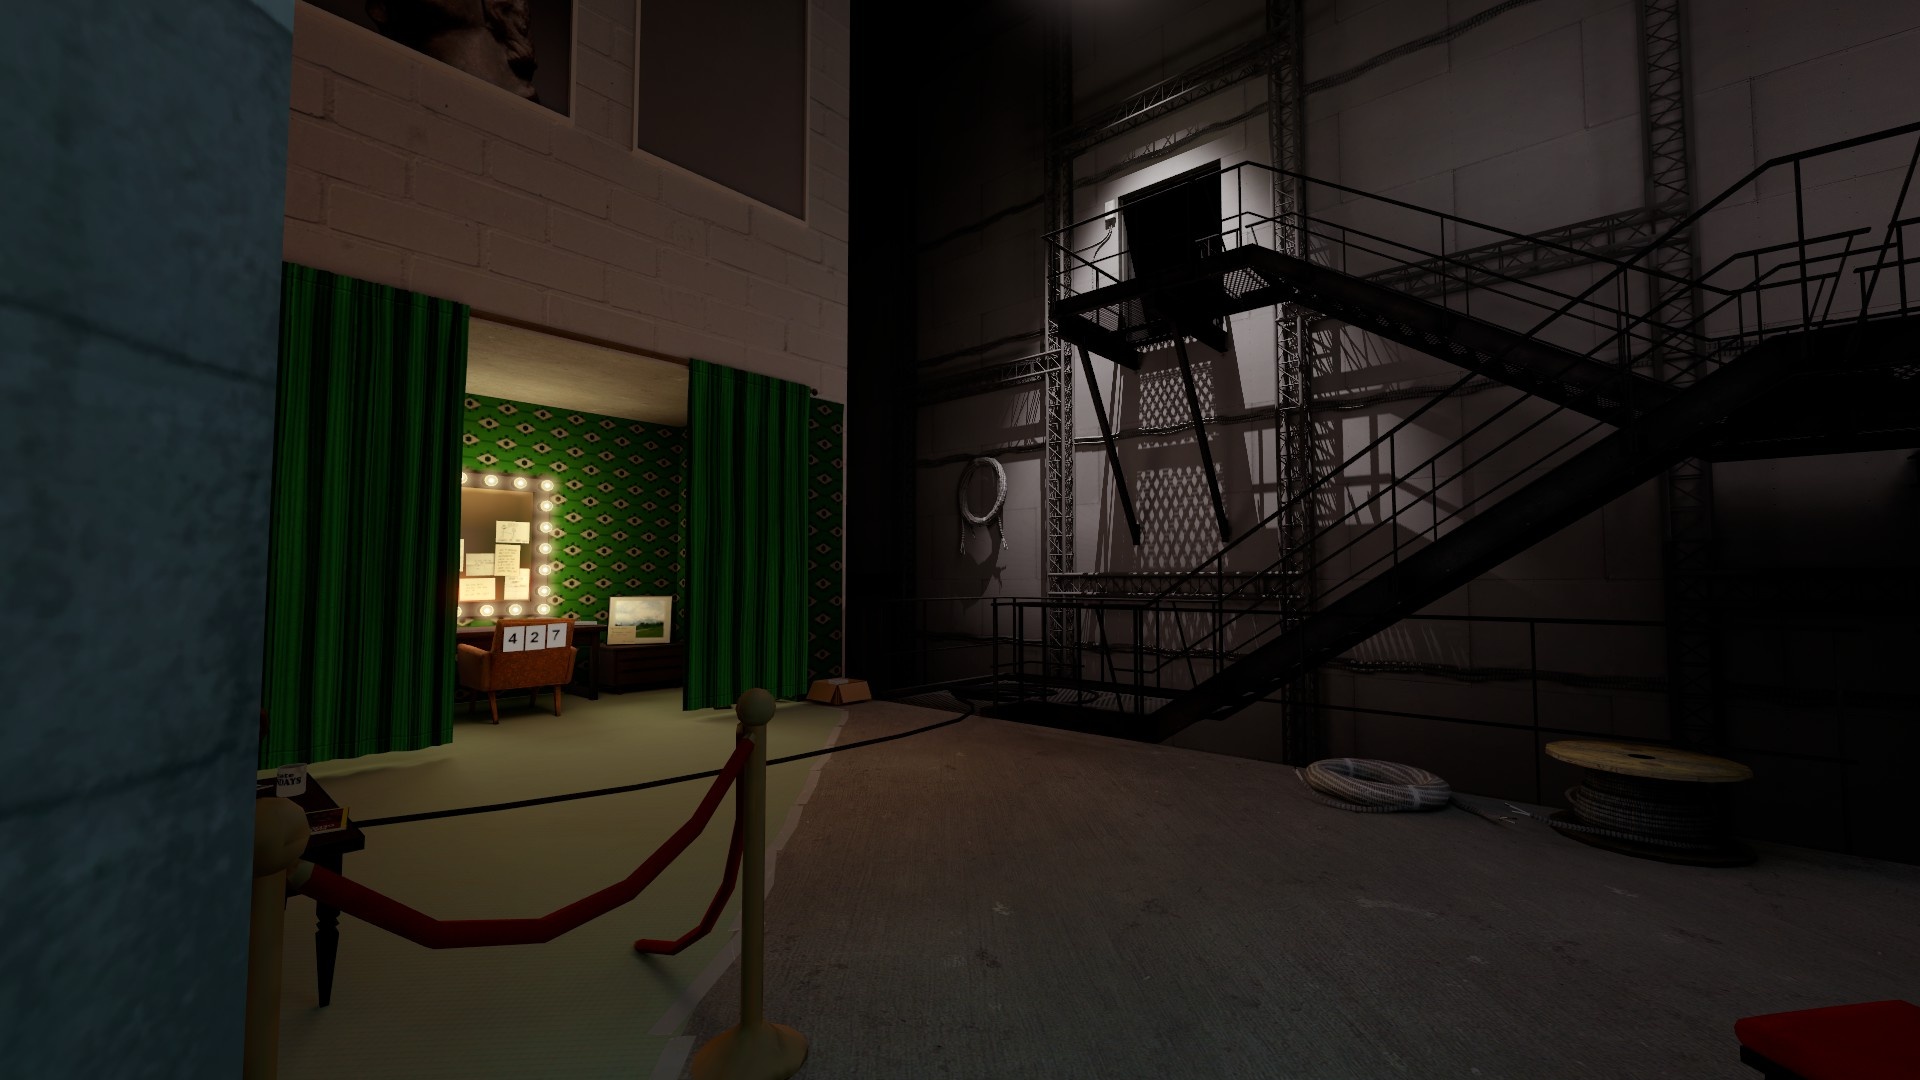 The Stanley Parable Ultra Deluxe: Elevator Ending, Post-Memory Zone, Crows Crows Crows. 1920x1080 Full HD Wallpaper.